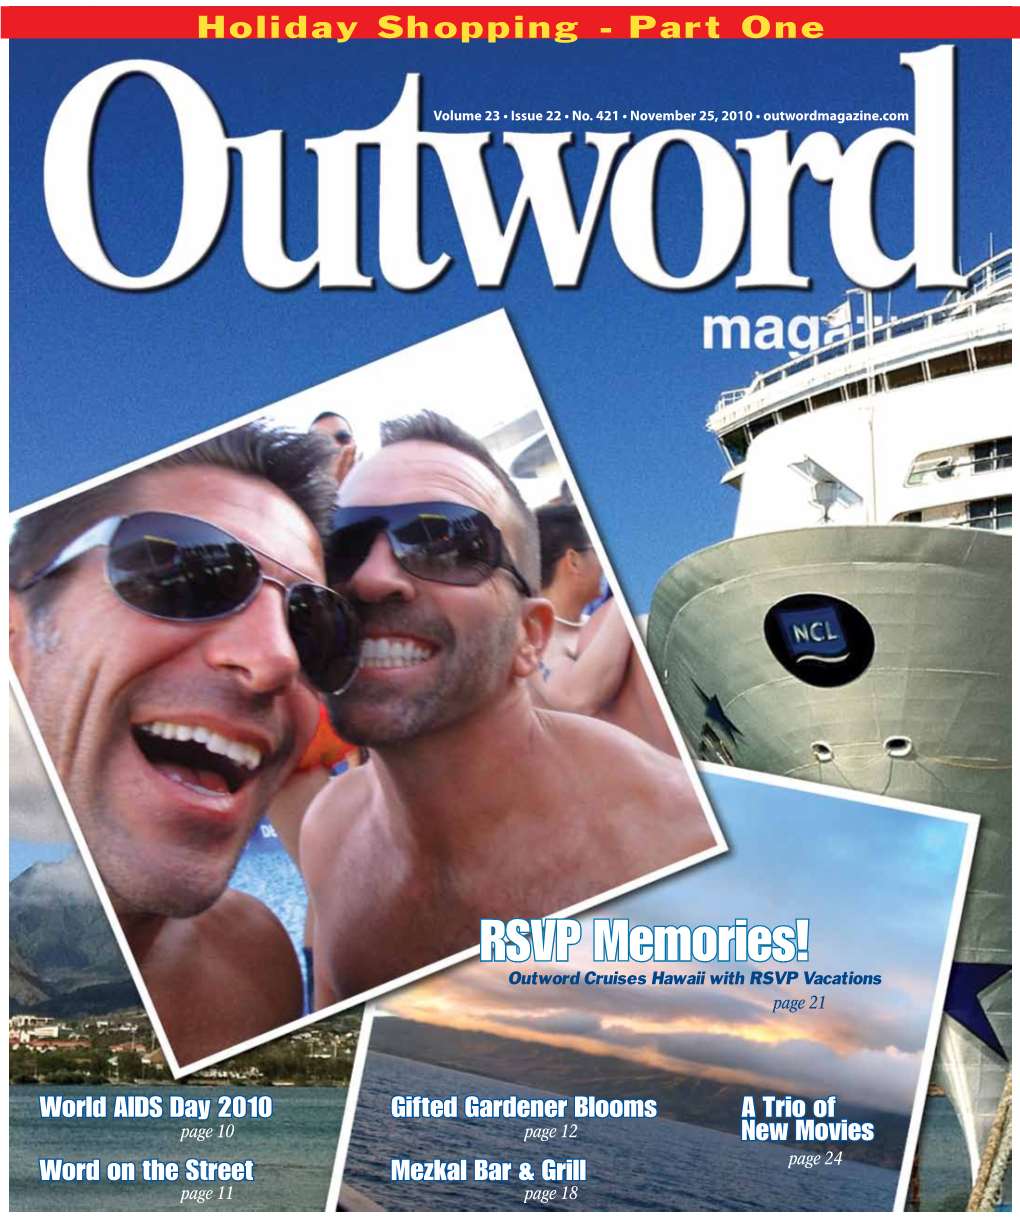 RSVP Memories! Outword Cruises Hawaii with RSVP Vacations Page 21